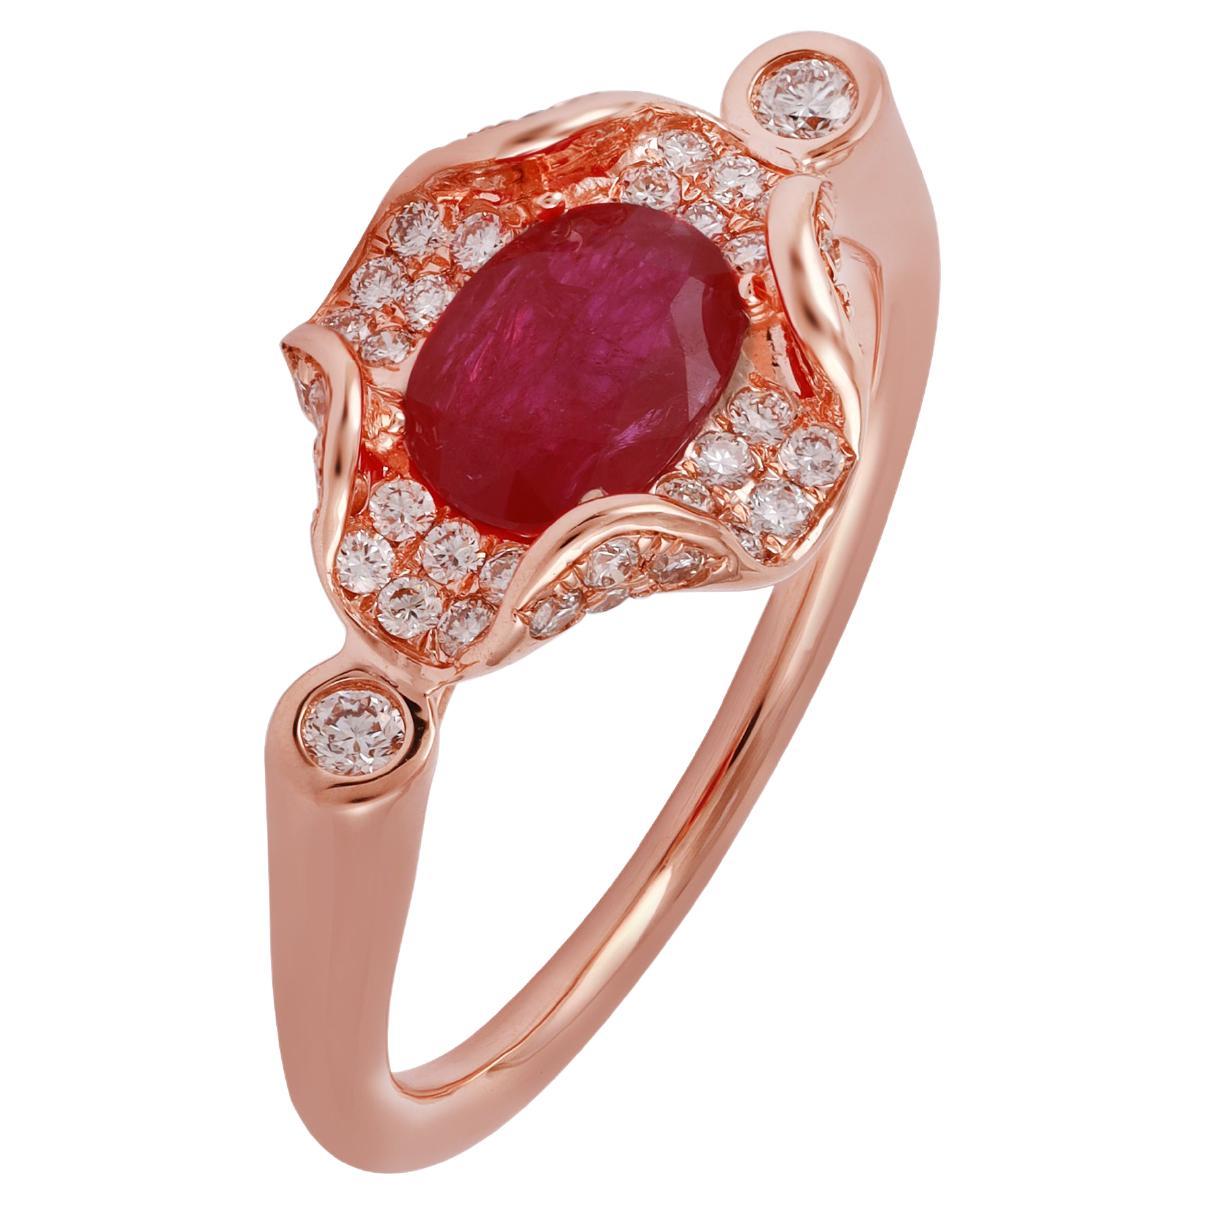 Eye Catching Mozambique Ruby Ring